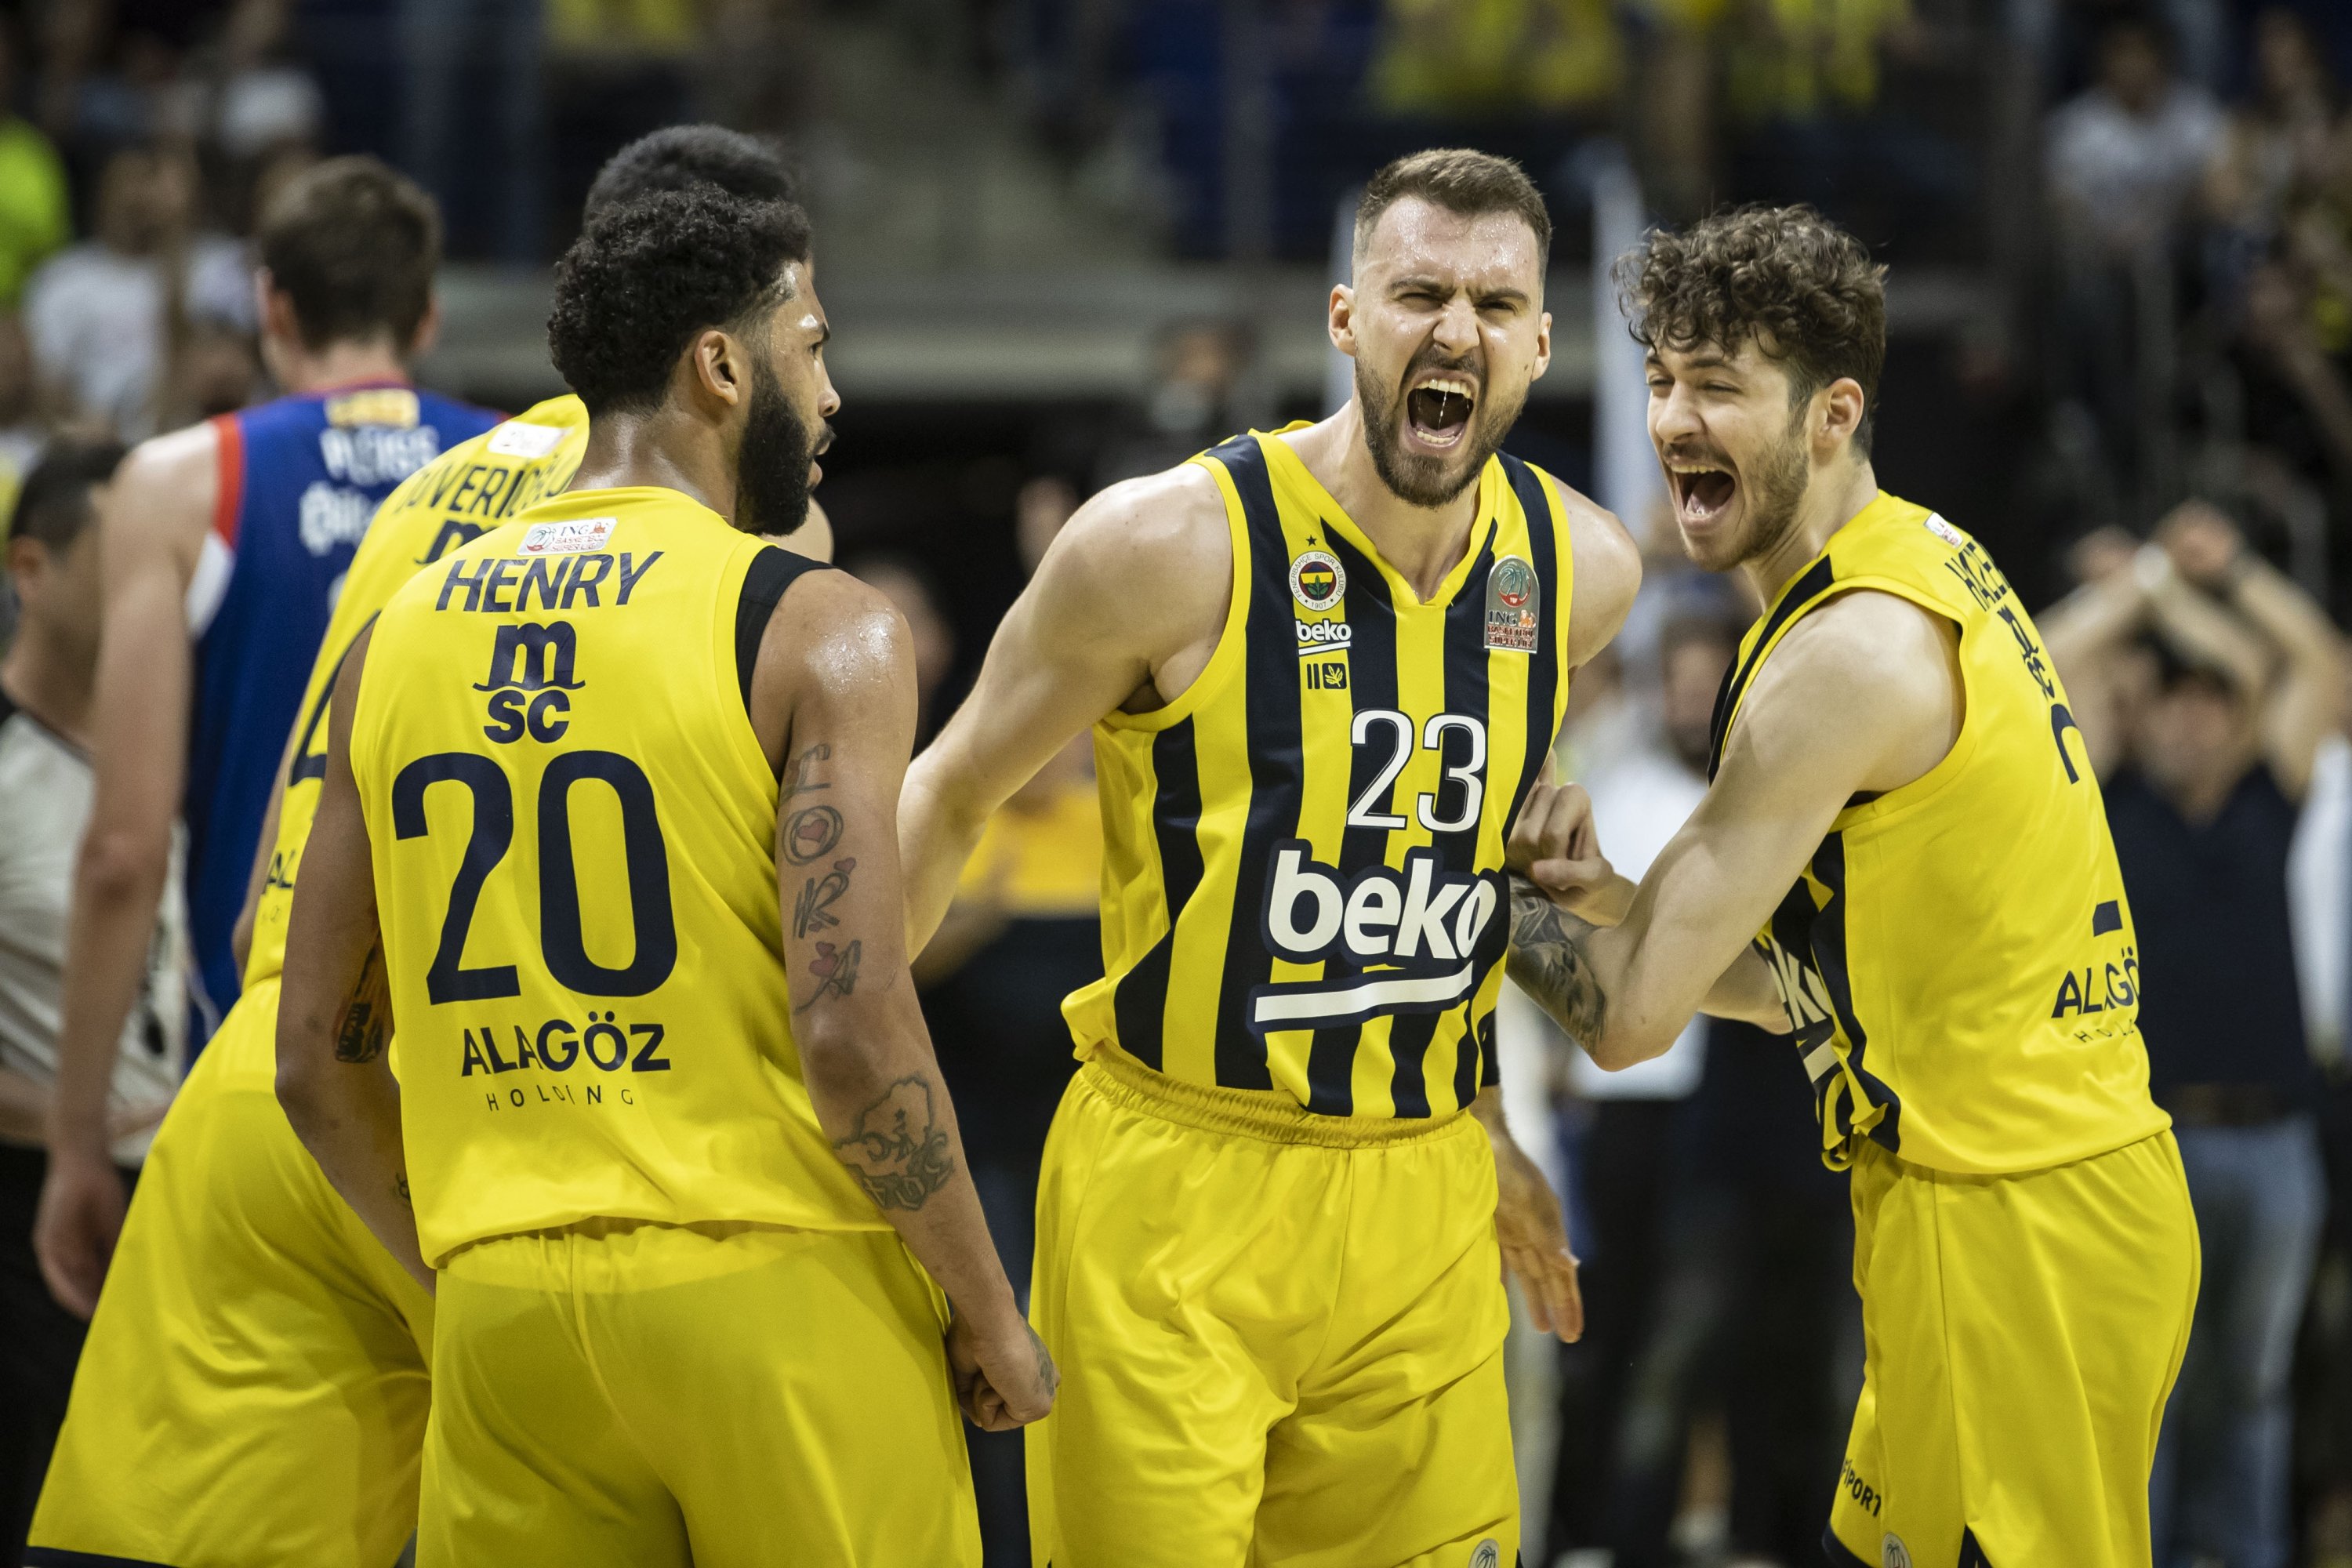 Fenerbahçe moves within win of claiming Turkish basketball title Daily Sabah